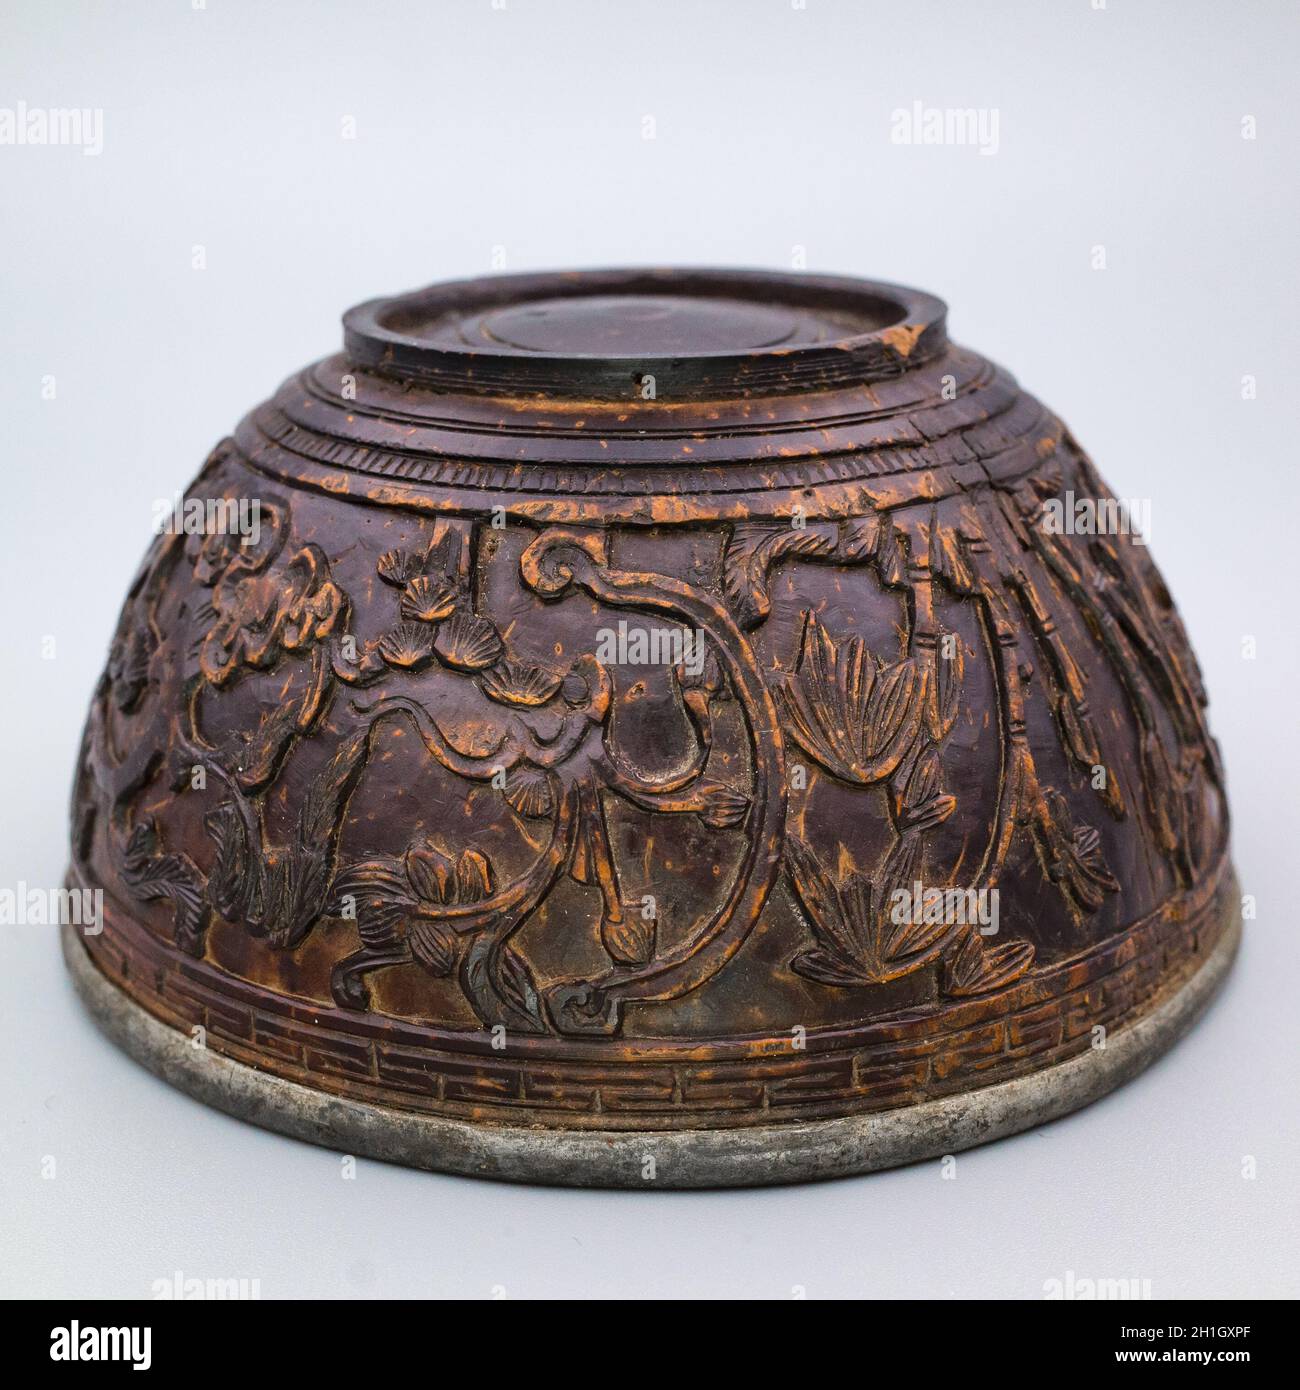 Antique Chinese Relief Carved Coconut Cups With Pewter Liners. Qing Dynasty Wood Carving Stock Photo